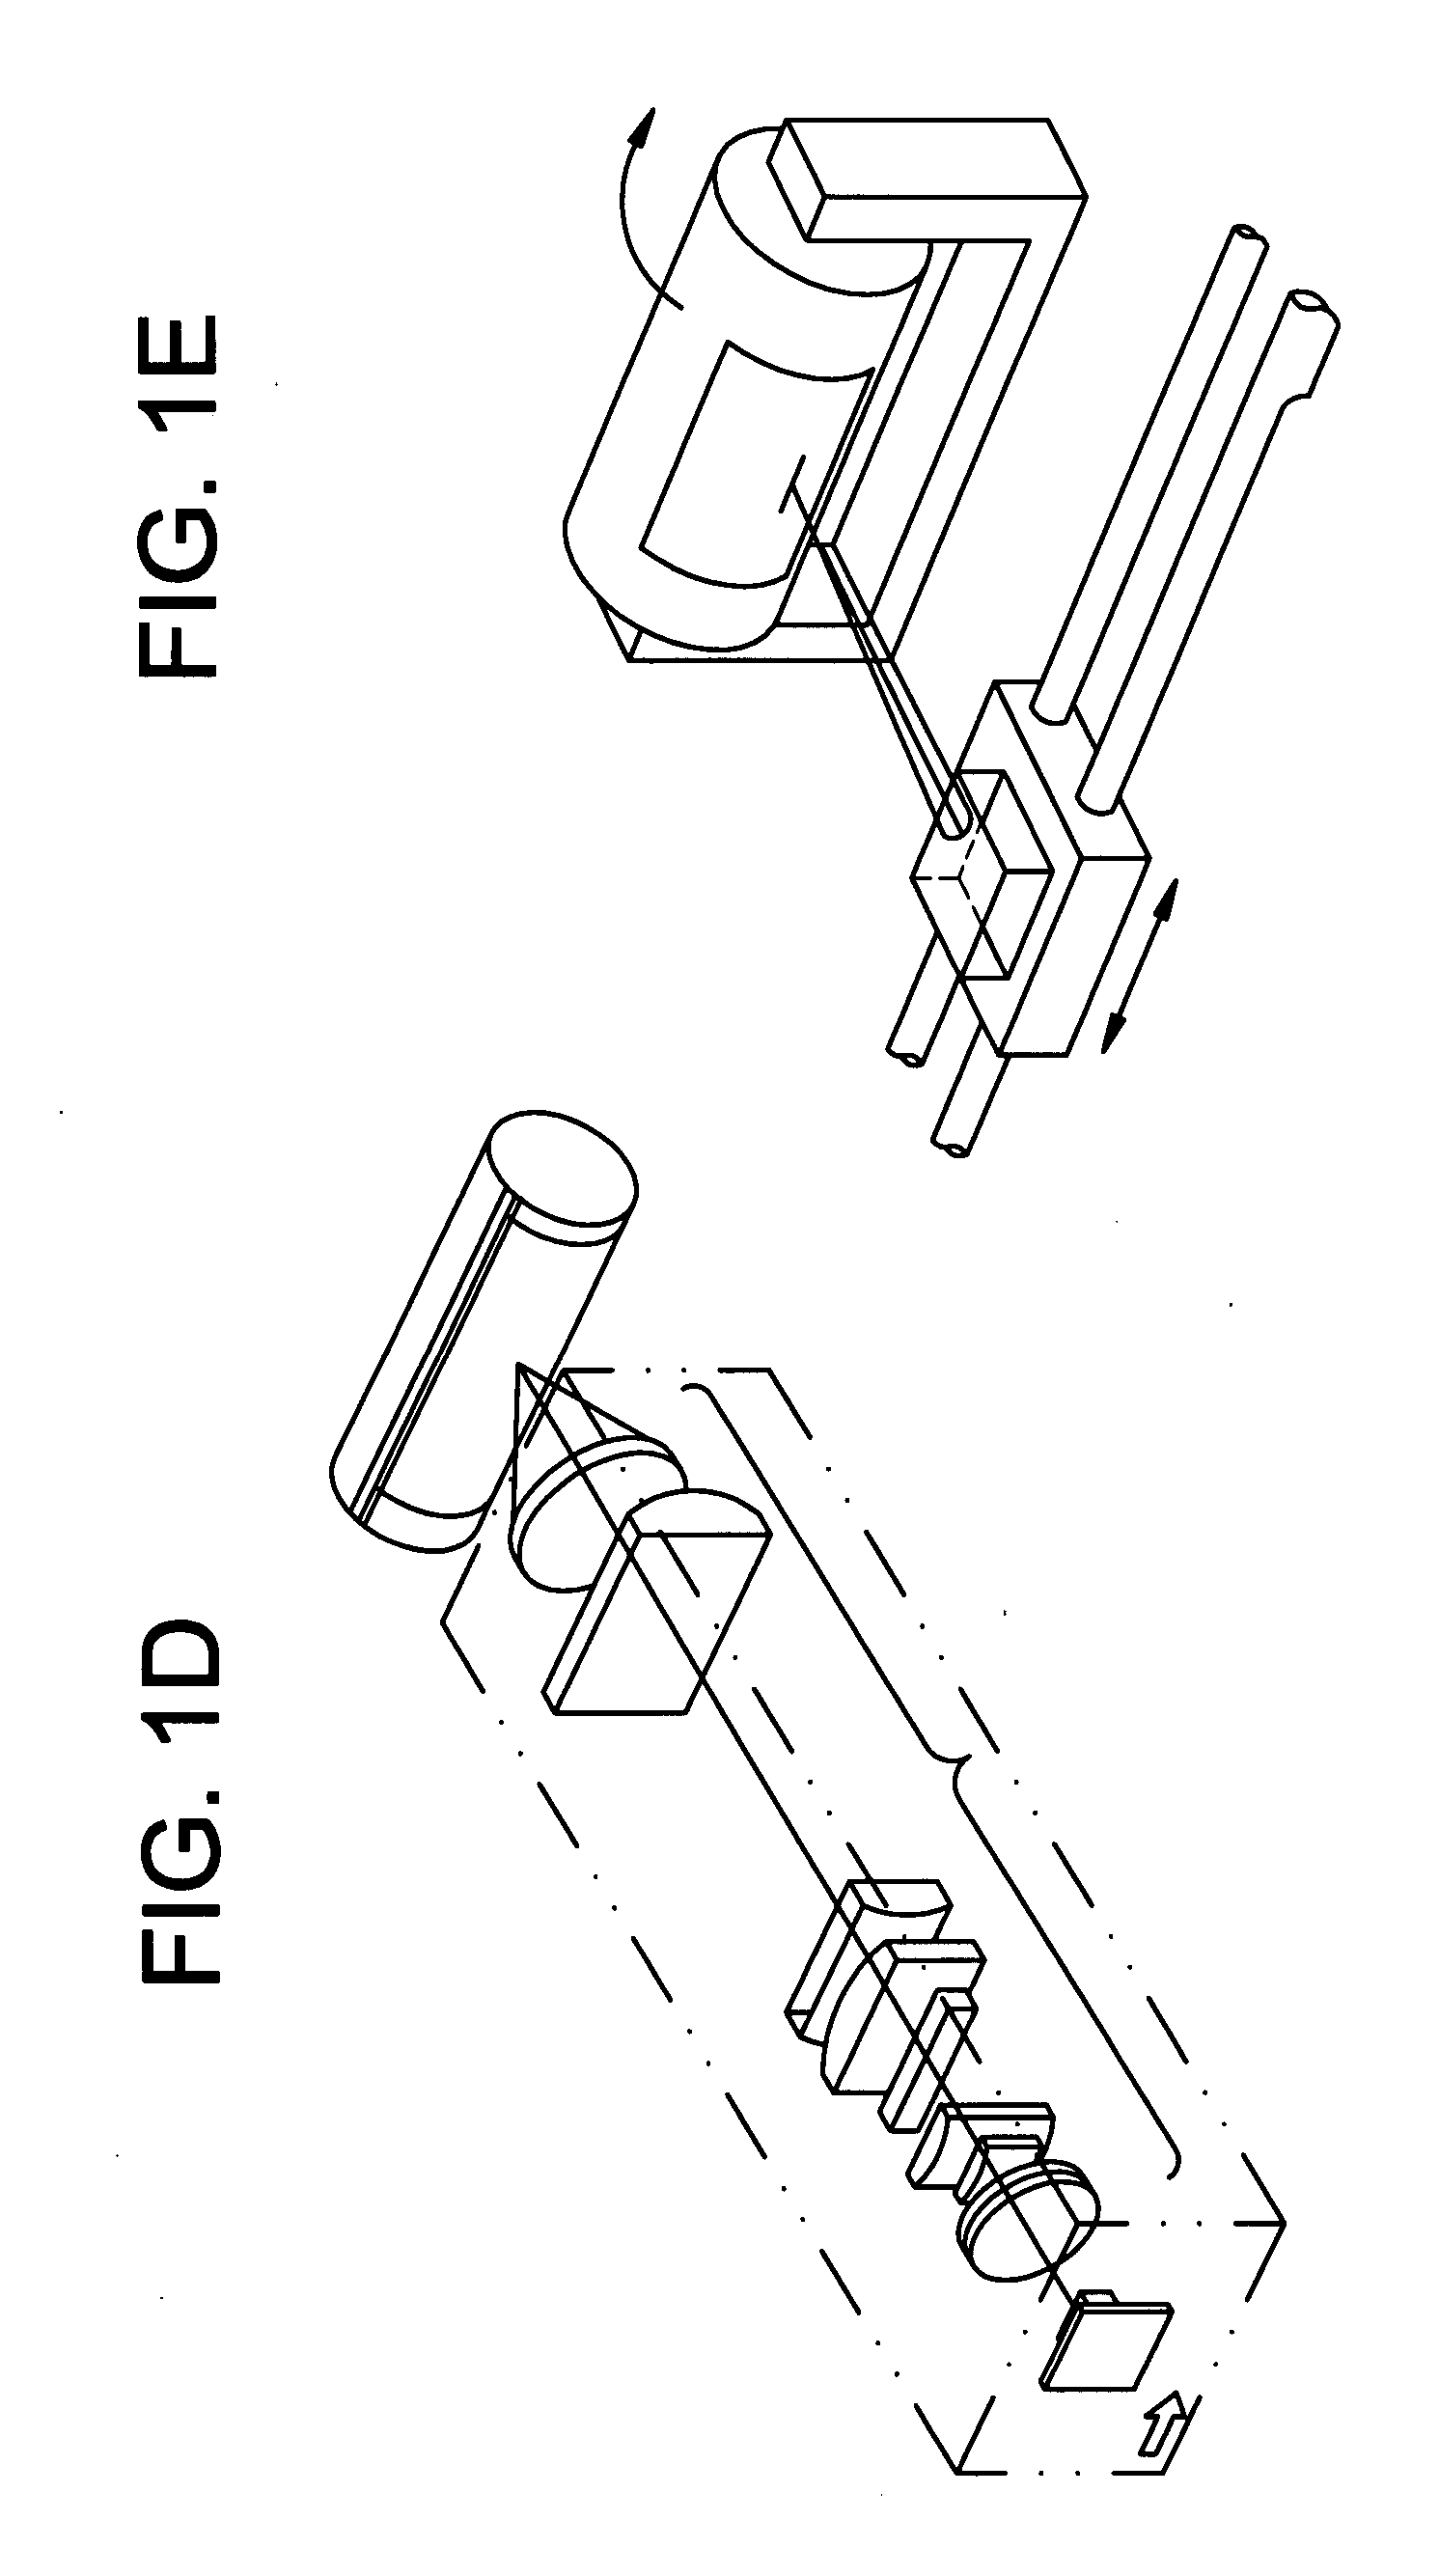 Writing apparatuses and methods